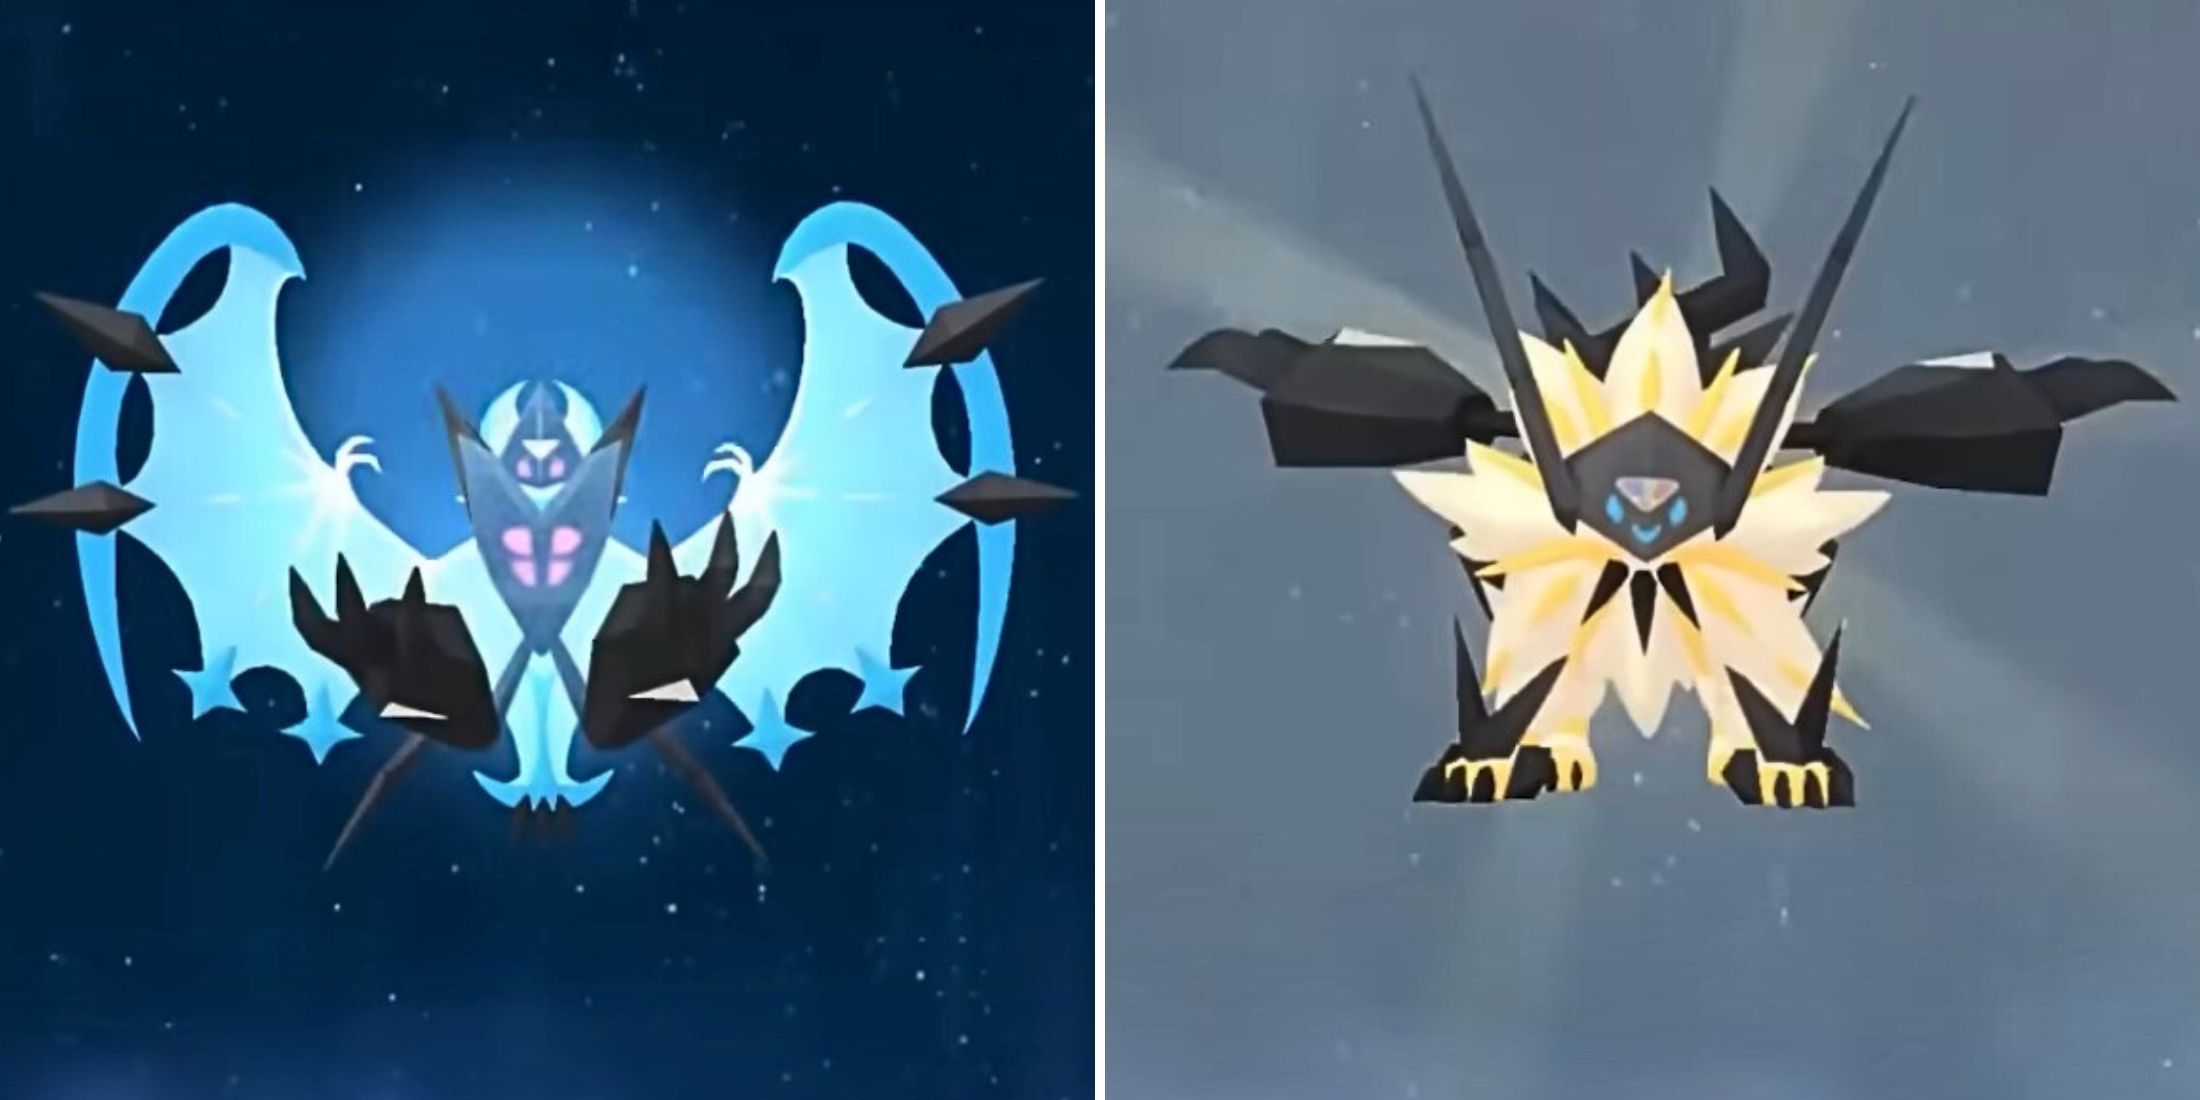 The Pokemon GO character is deciding between using the Solar or Lunar Fusion on Necrozma.